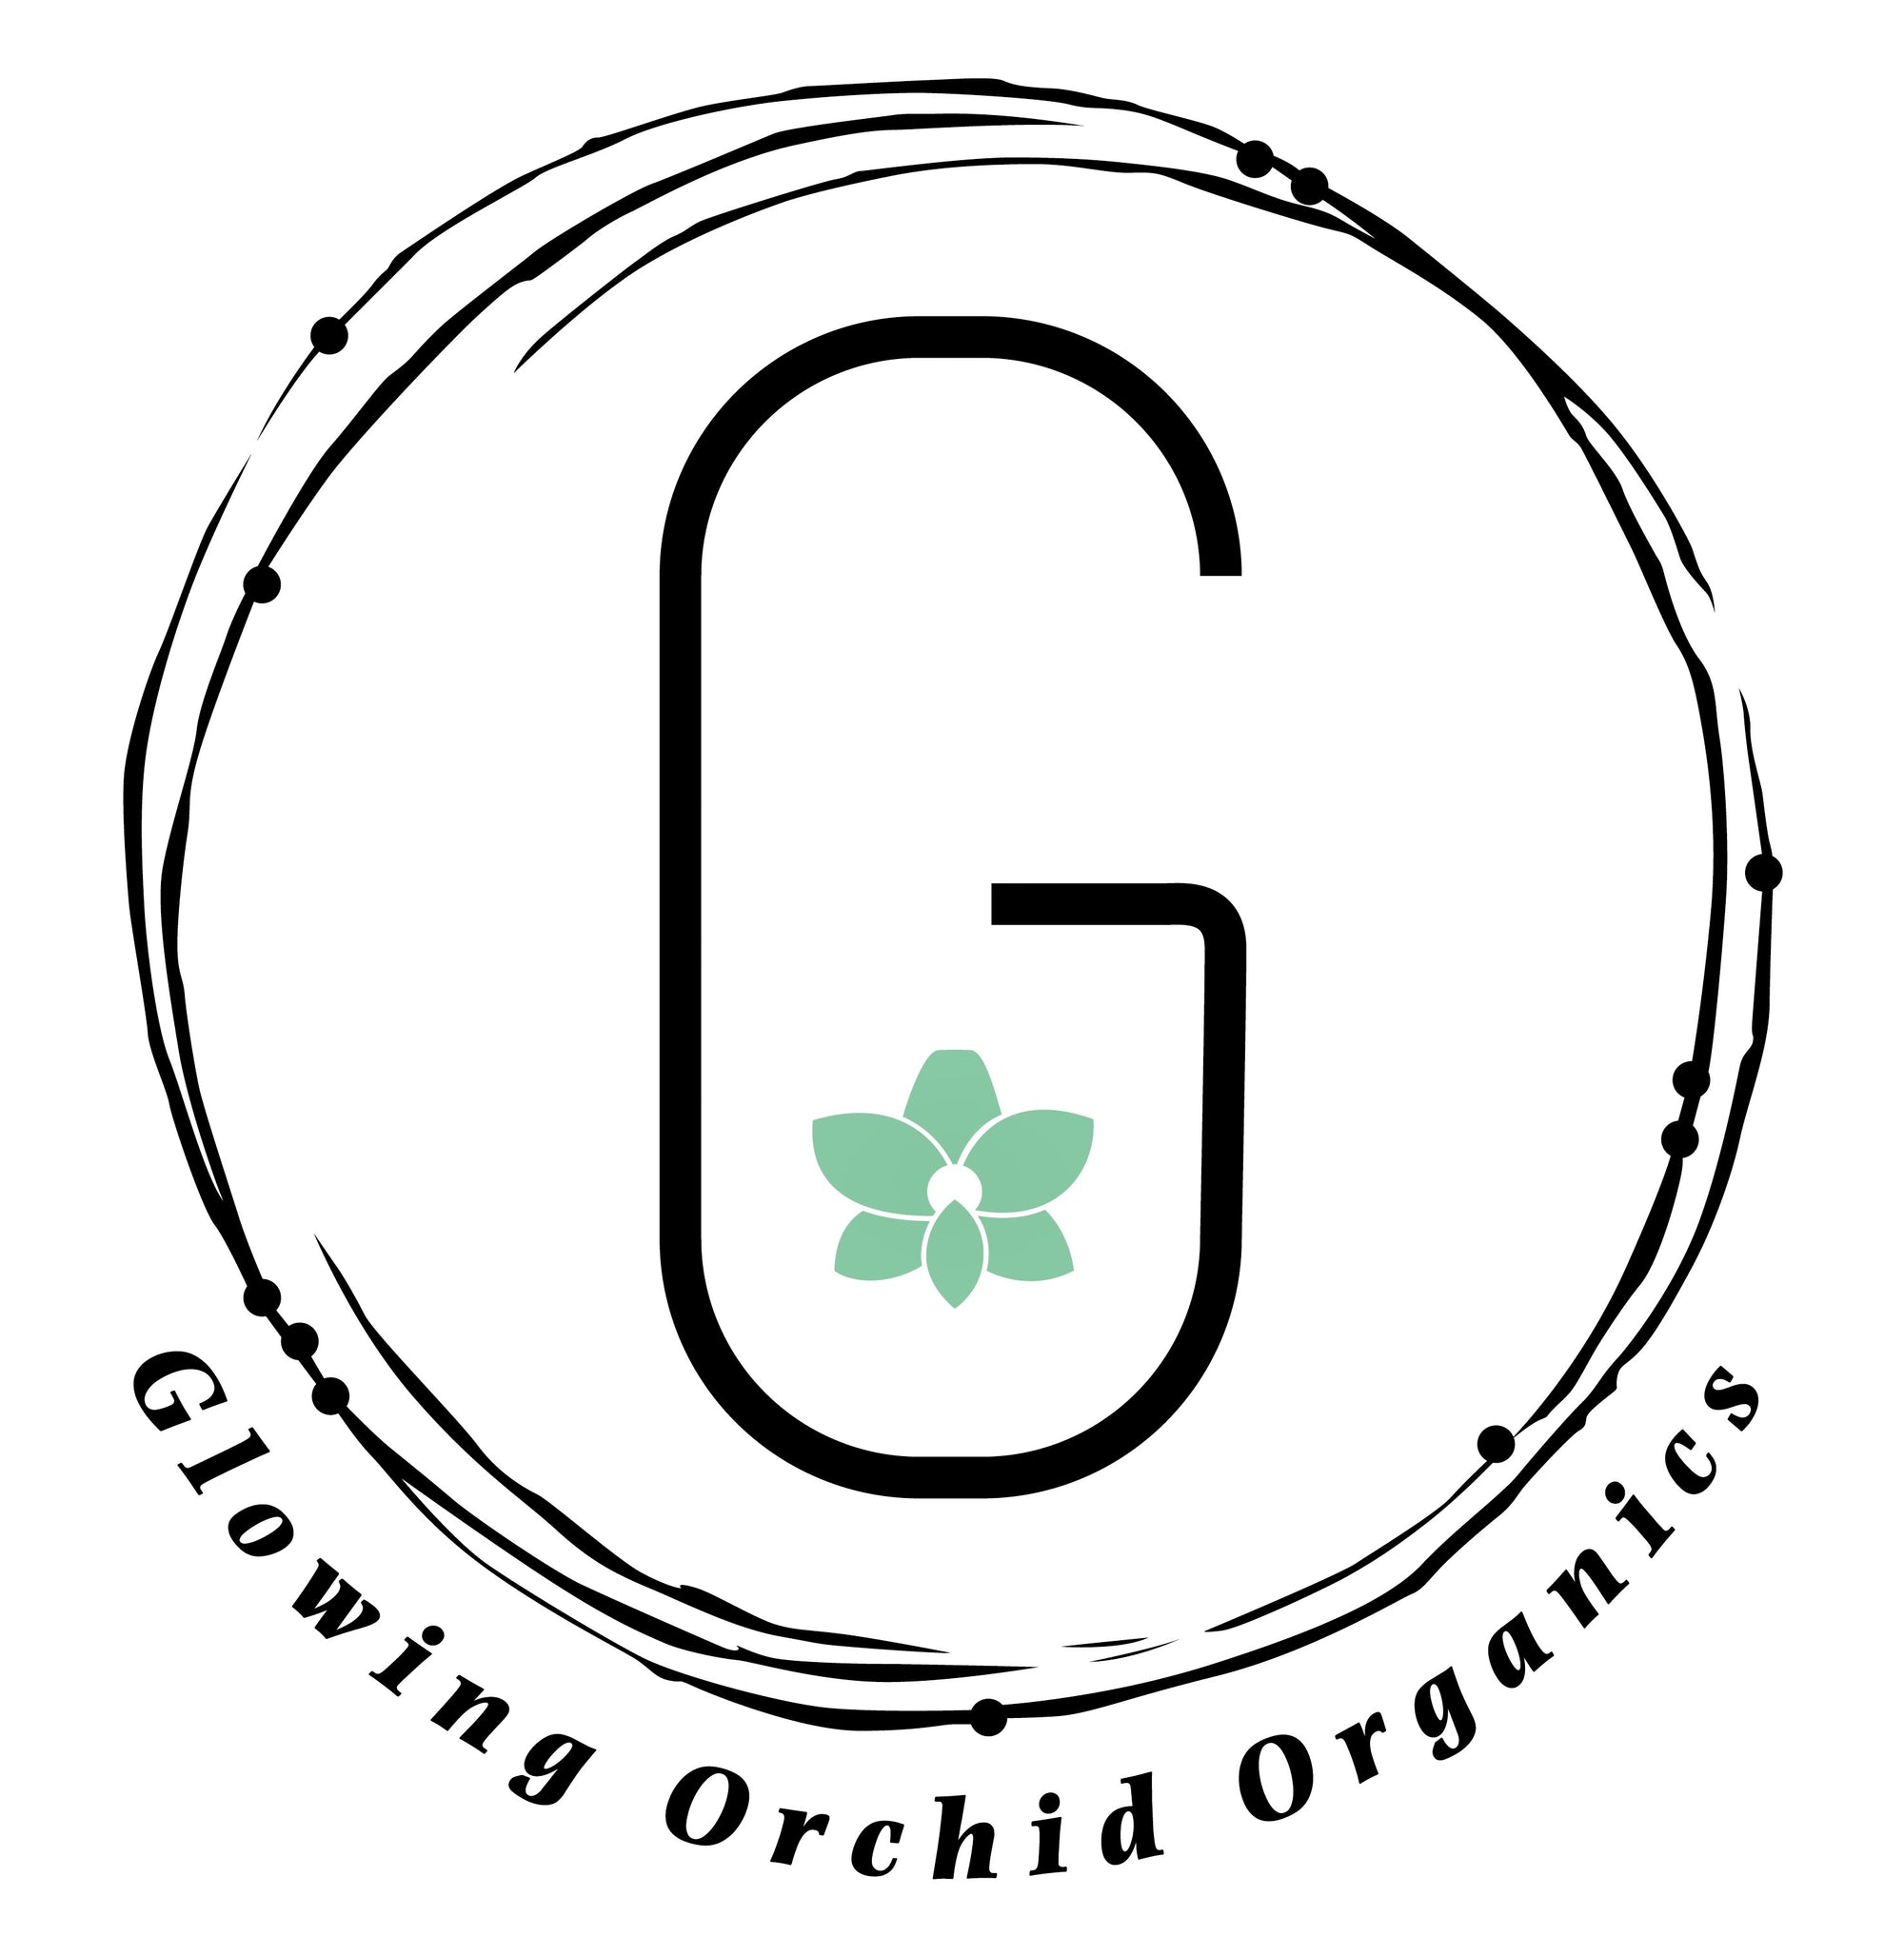 Glowing Orchid Organics Favicon Capital G with Teal Orchid in the center enveloped in circular artwork and cradled by company name 2020